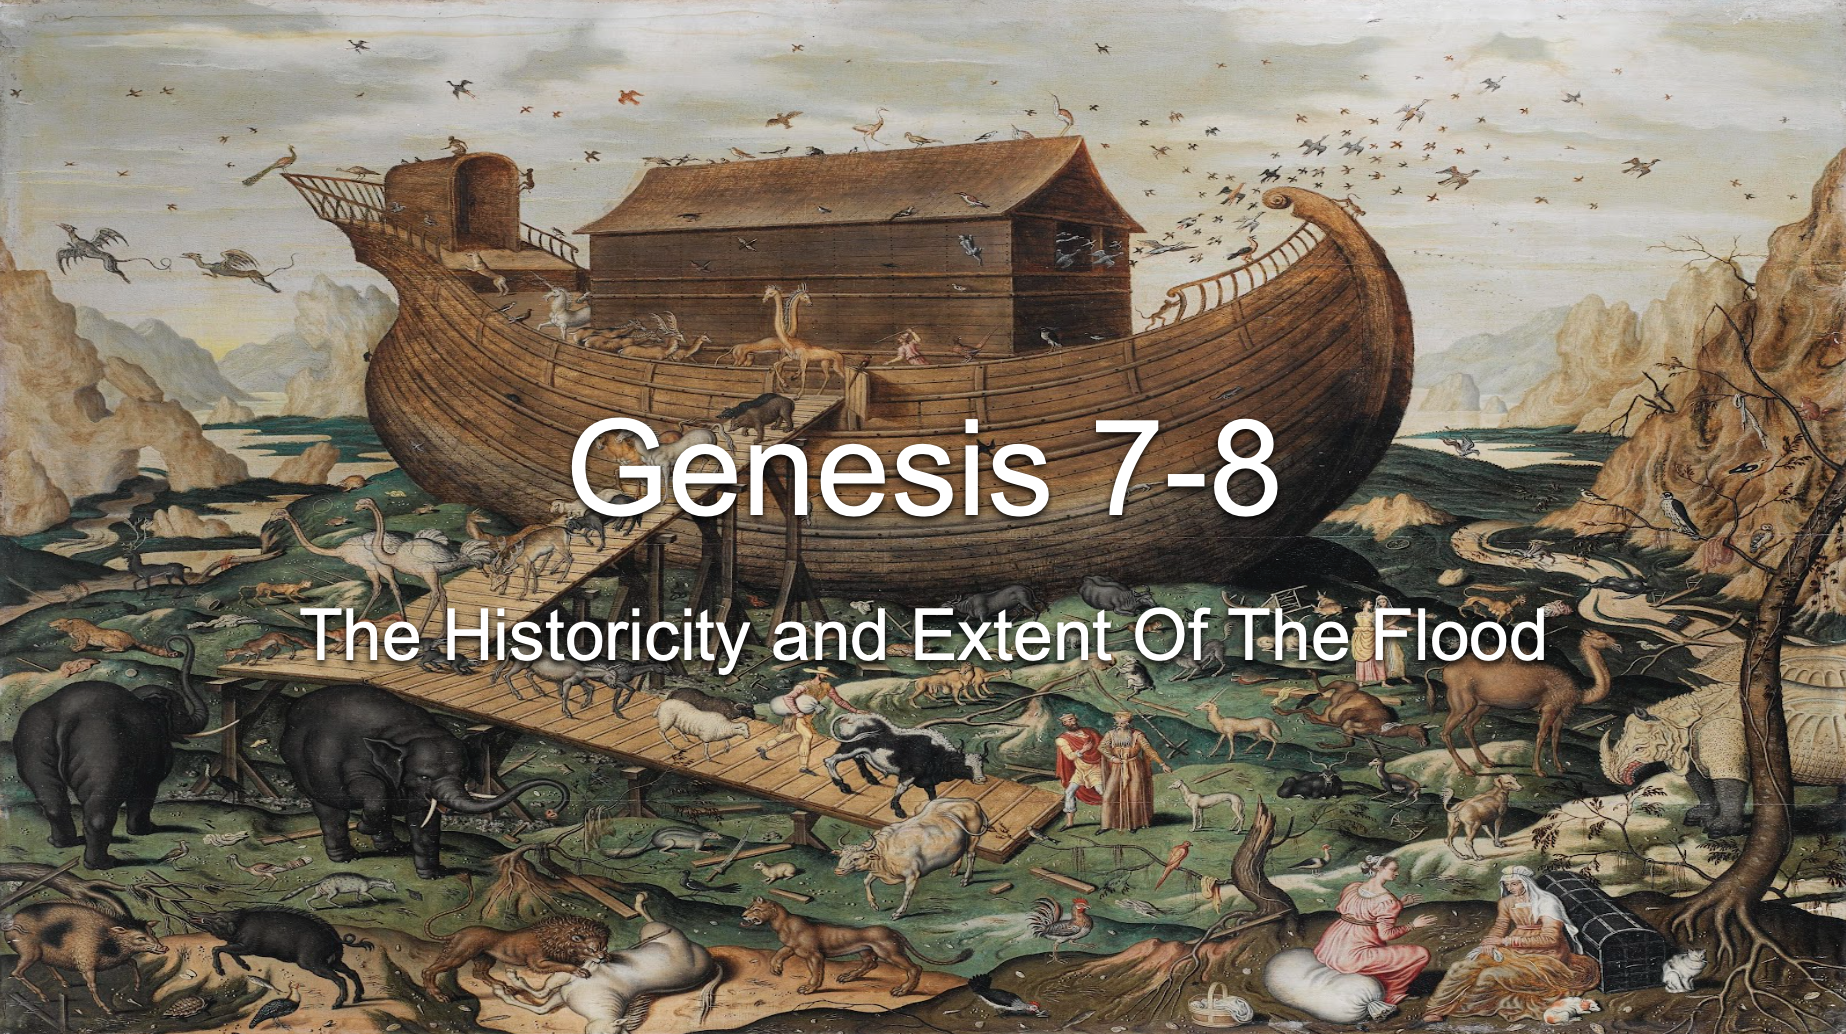 Genesis 7-8: The Historicity and Extent Of The Flood